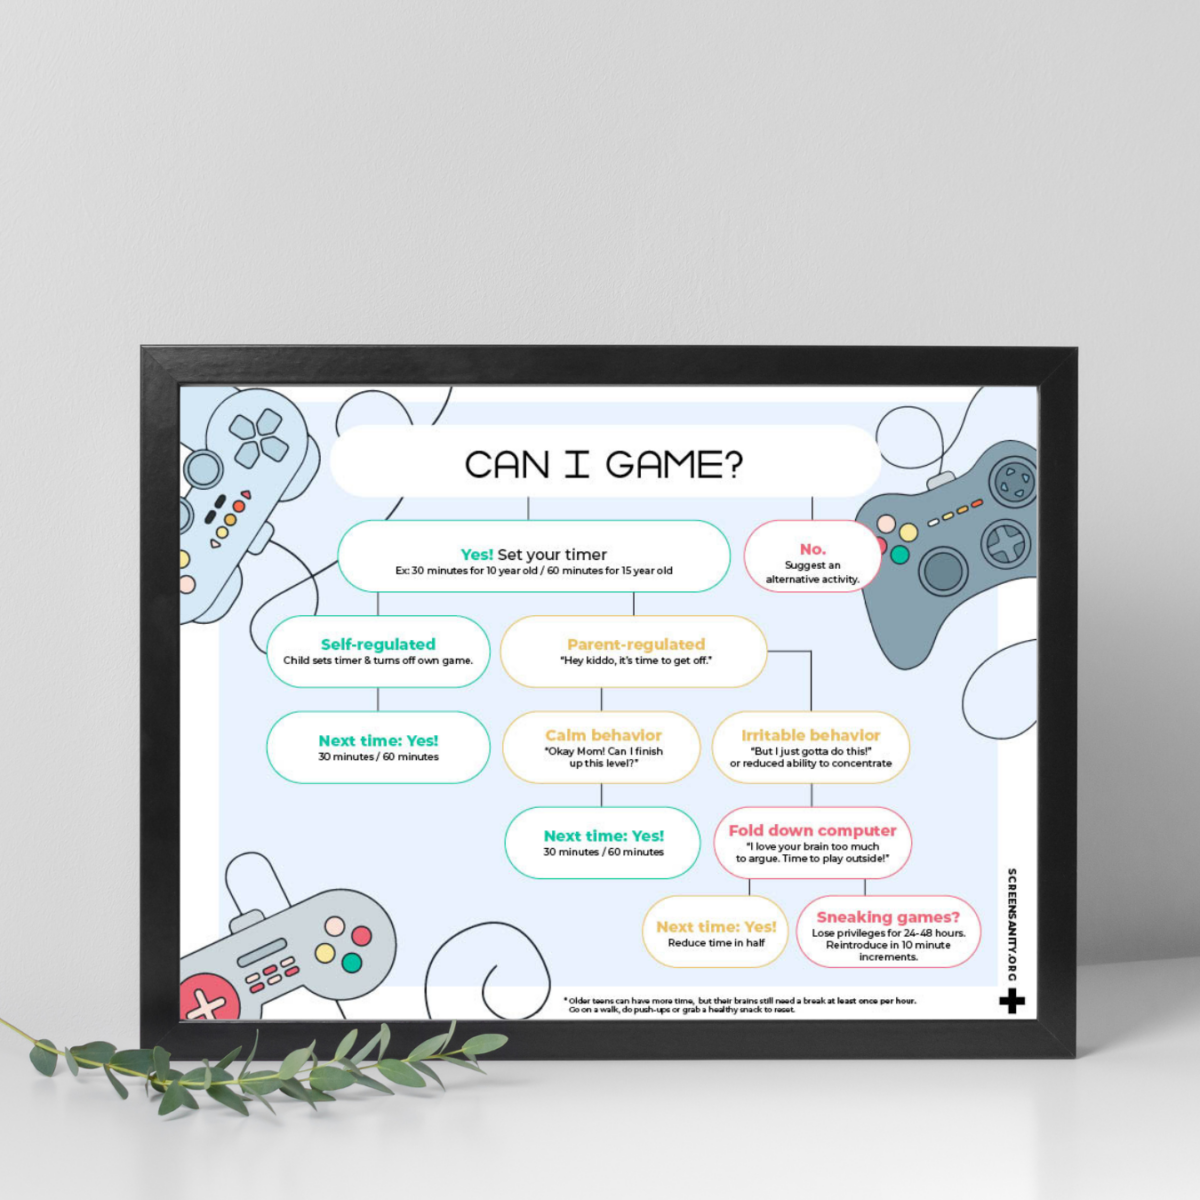 Framed copy of video game decision tree printed off and sitting on a table